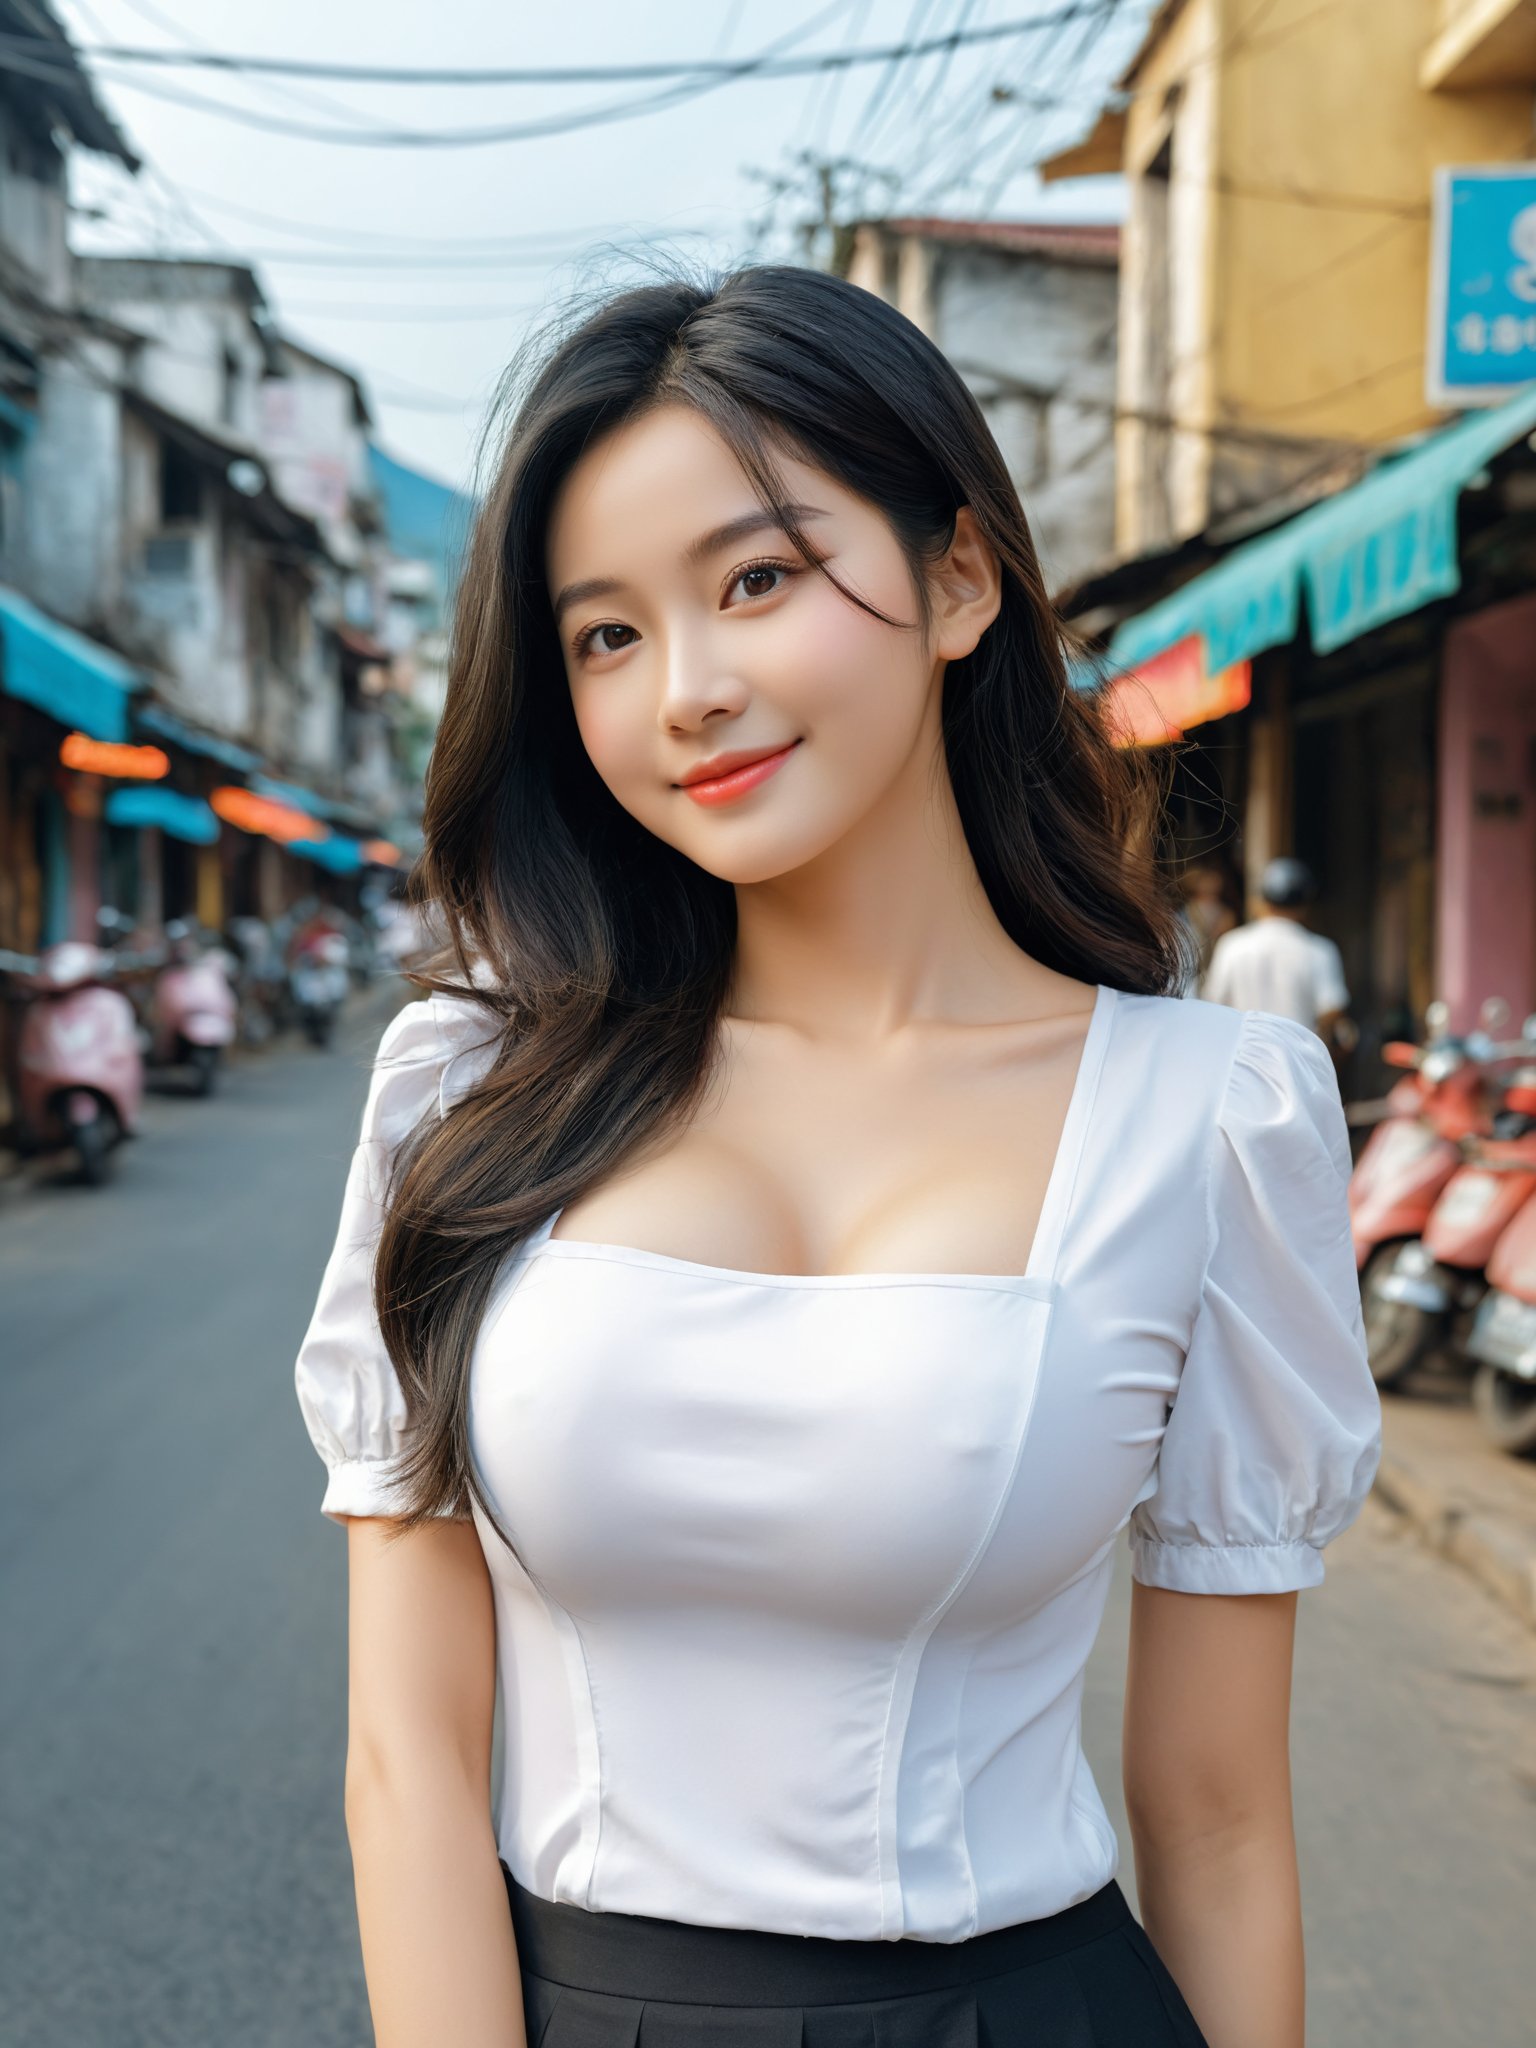 masterpiece, best quality, realistic, photo, real, incredibly_absurdres, Ultra HD, Affectionately looking at you, 8K, UHD, in the vietnamese city street, full body, salute, bust photo,The 20-year-old vietnamese girl, She has black hair, nurse shirt outfit, The lines of her face are soft and smooth. Her skin is as fair as snow, soft and delicate, and her eyes are bright and bright, deep and mysterious, making people feel endless charm and appeal. The eyebrows are slender and graceful, the nose is straight and noble, the lips are rosy and seductive, and the slightly raised angle reveals confidence and elegance. Her facial features are delicate and three-dimensional, with well-defined contours, like a fine painting or a finely carved work of art. The overall feeling is gentle, elegant, noble and full of charm, huge_filesize, bust, girl, kawaii, adorable girl, bishoujo, ojousama, idol, wavy hair, long hair, black hair, beautiful detailed eyes, looking at viewer, seductive smile, black eyes, large breasts, arms behind back